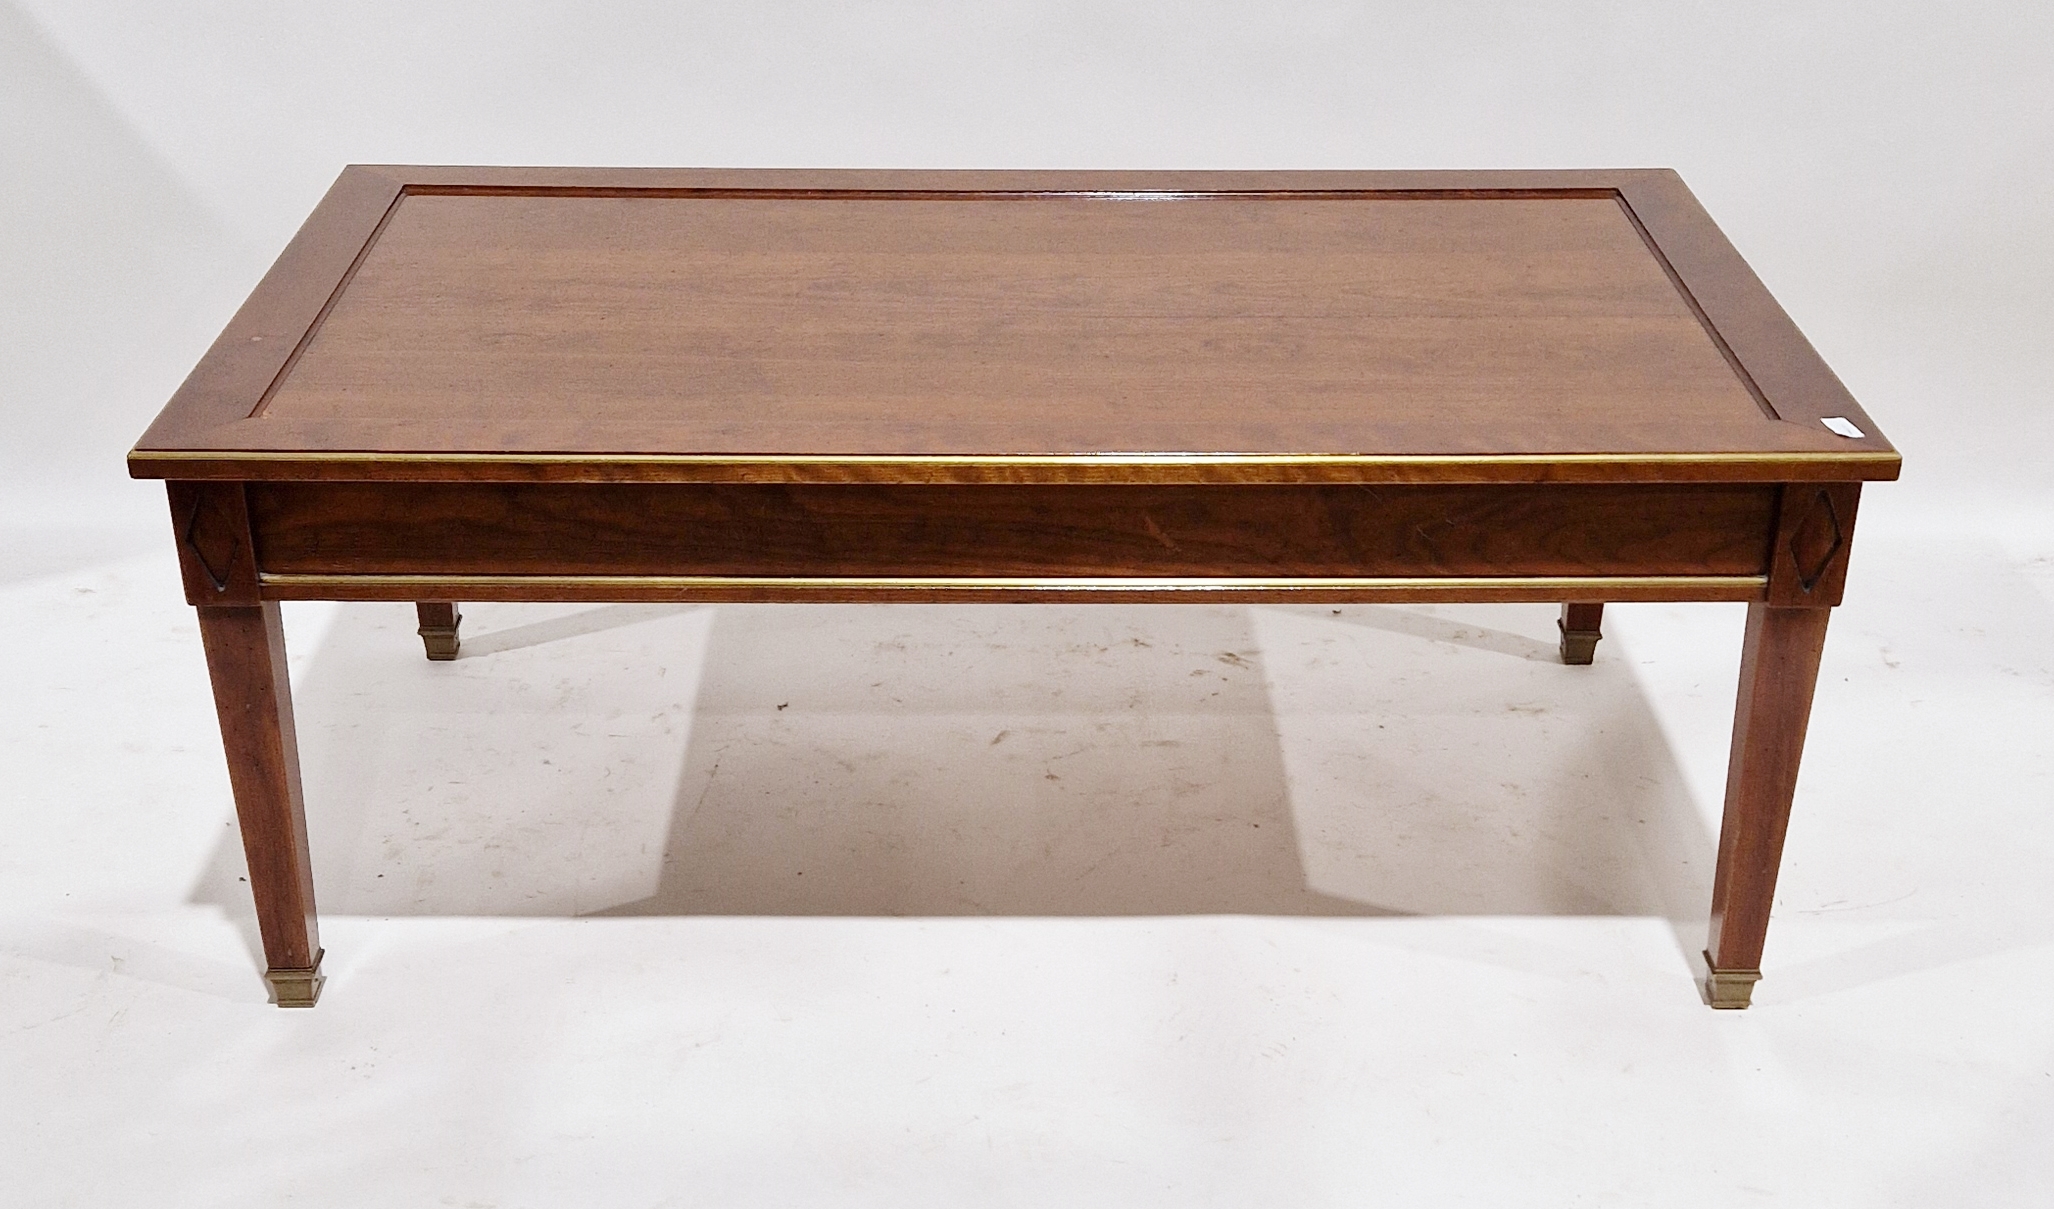 Modern stained wooden coffee table by Grange of rectangular form with gilt detailed borders, 47cm